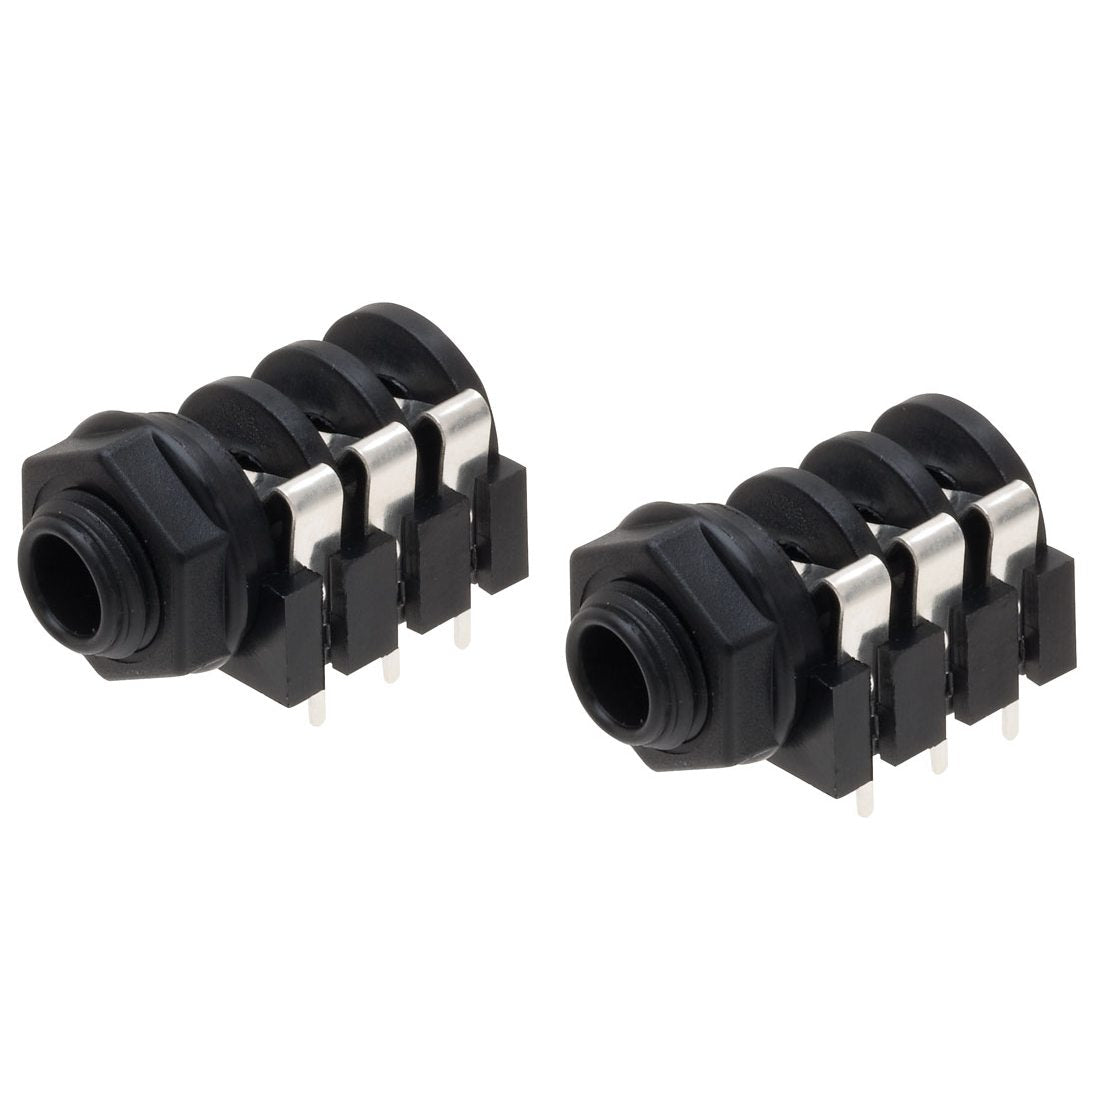 6.35mm 1/4" Audio Jack Socket Stereo 3 Pole PCB or Chassis Mount pack of 2